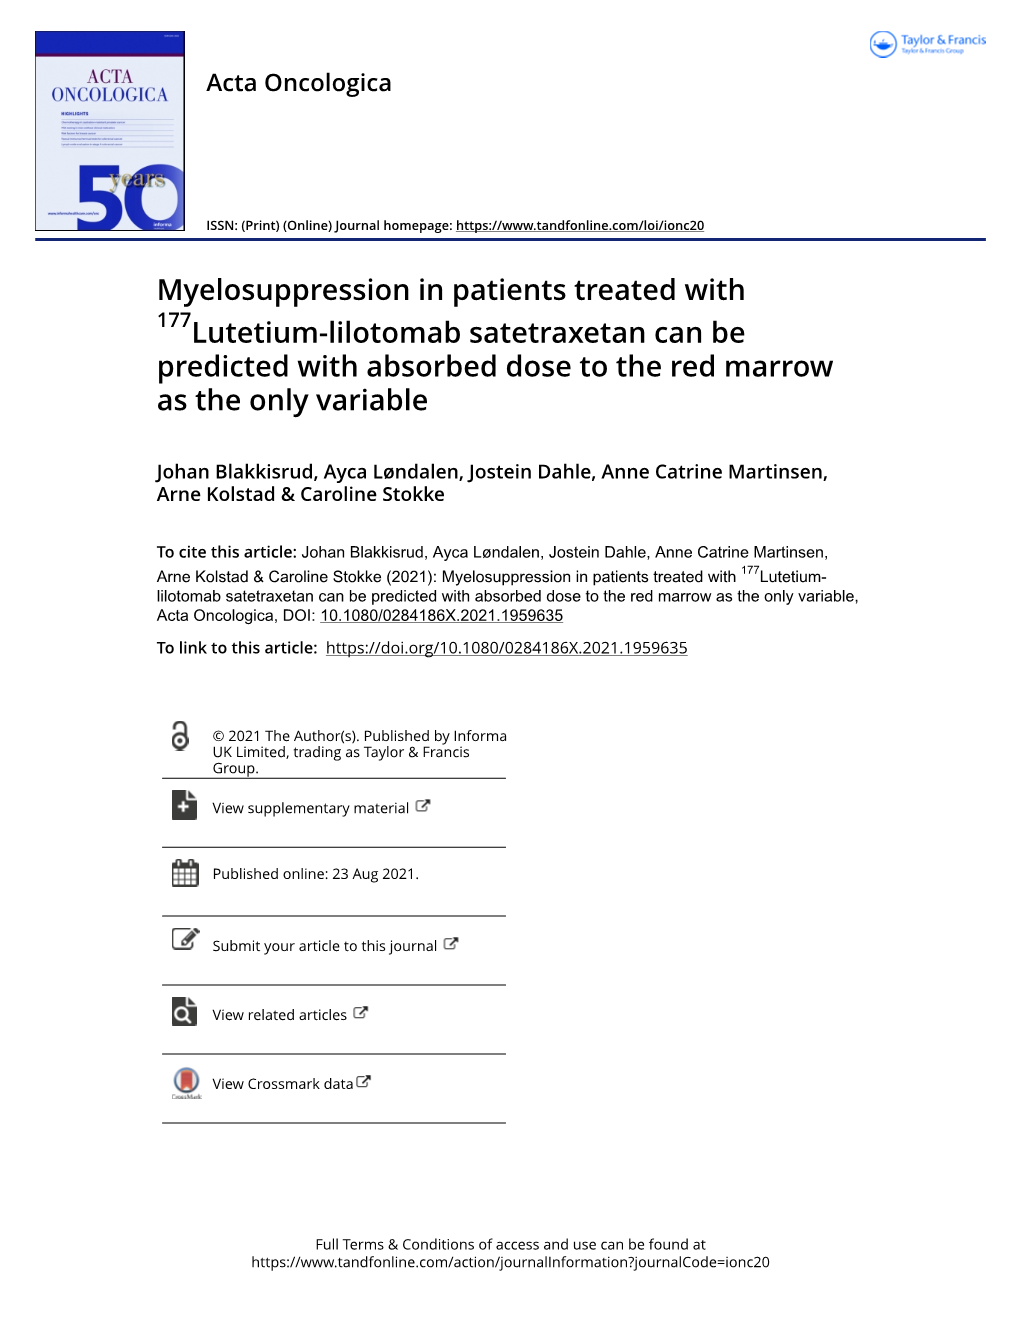 Myelosuppression in Patients Treated with 177Lutetium-Lilotomab Satetraxetan Can Be Predicted with Absorbed Dose to the Red Marrow As the Only Variable